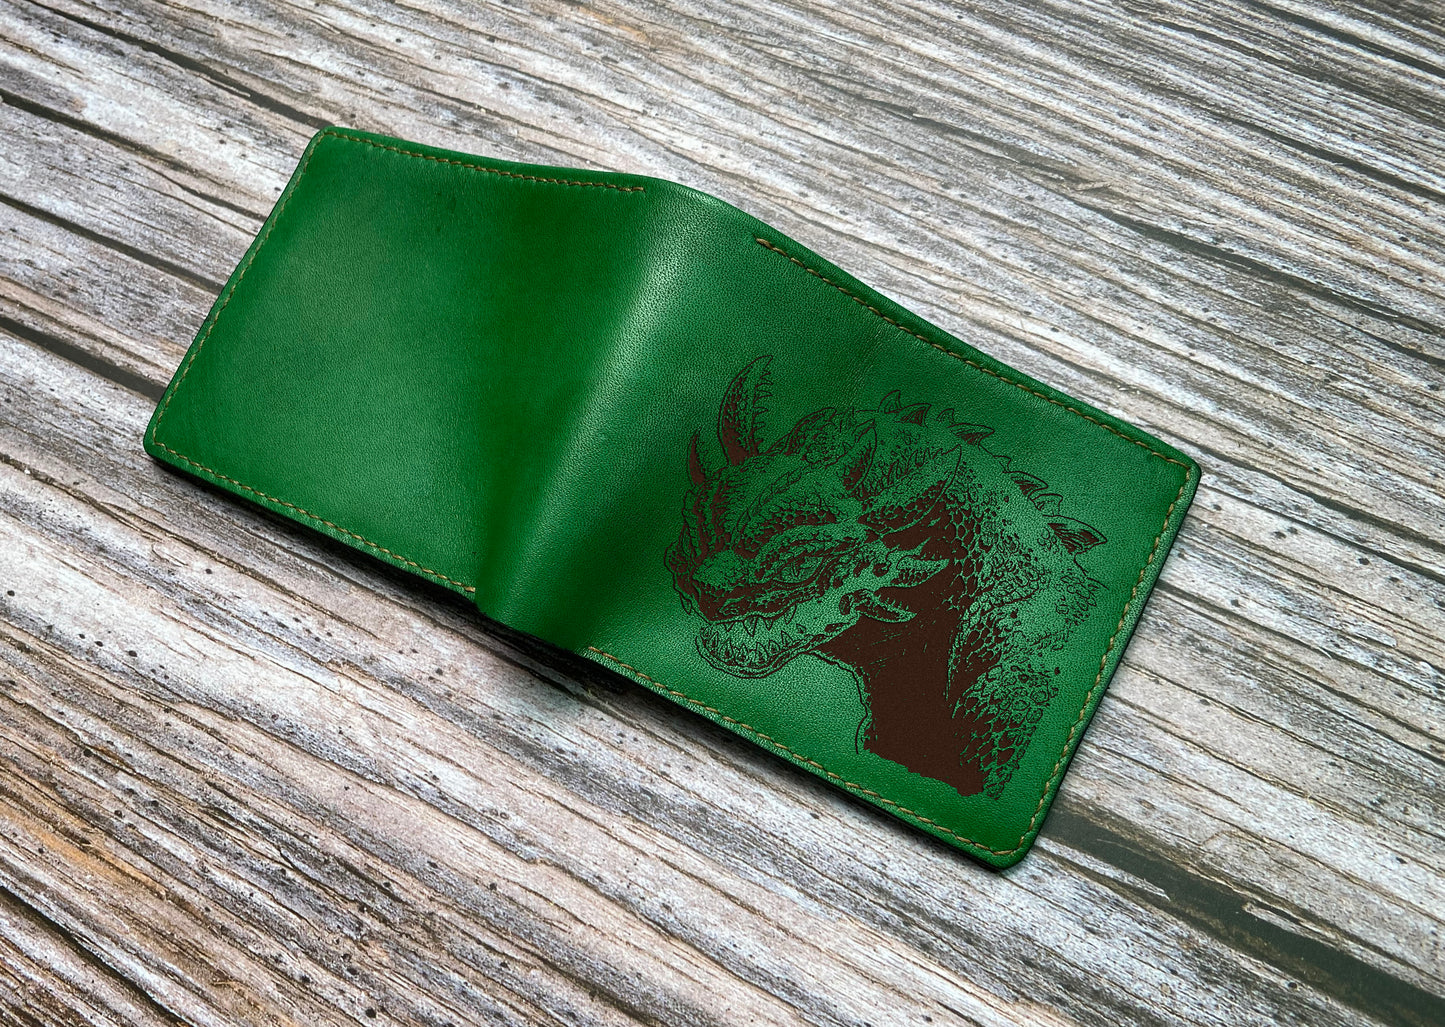 Toothless dragon leather handmade wallet, how to train your dragon gift ideas, dragon men wallet